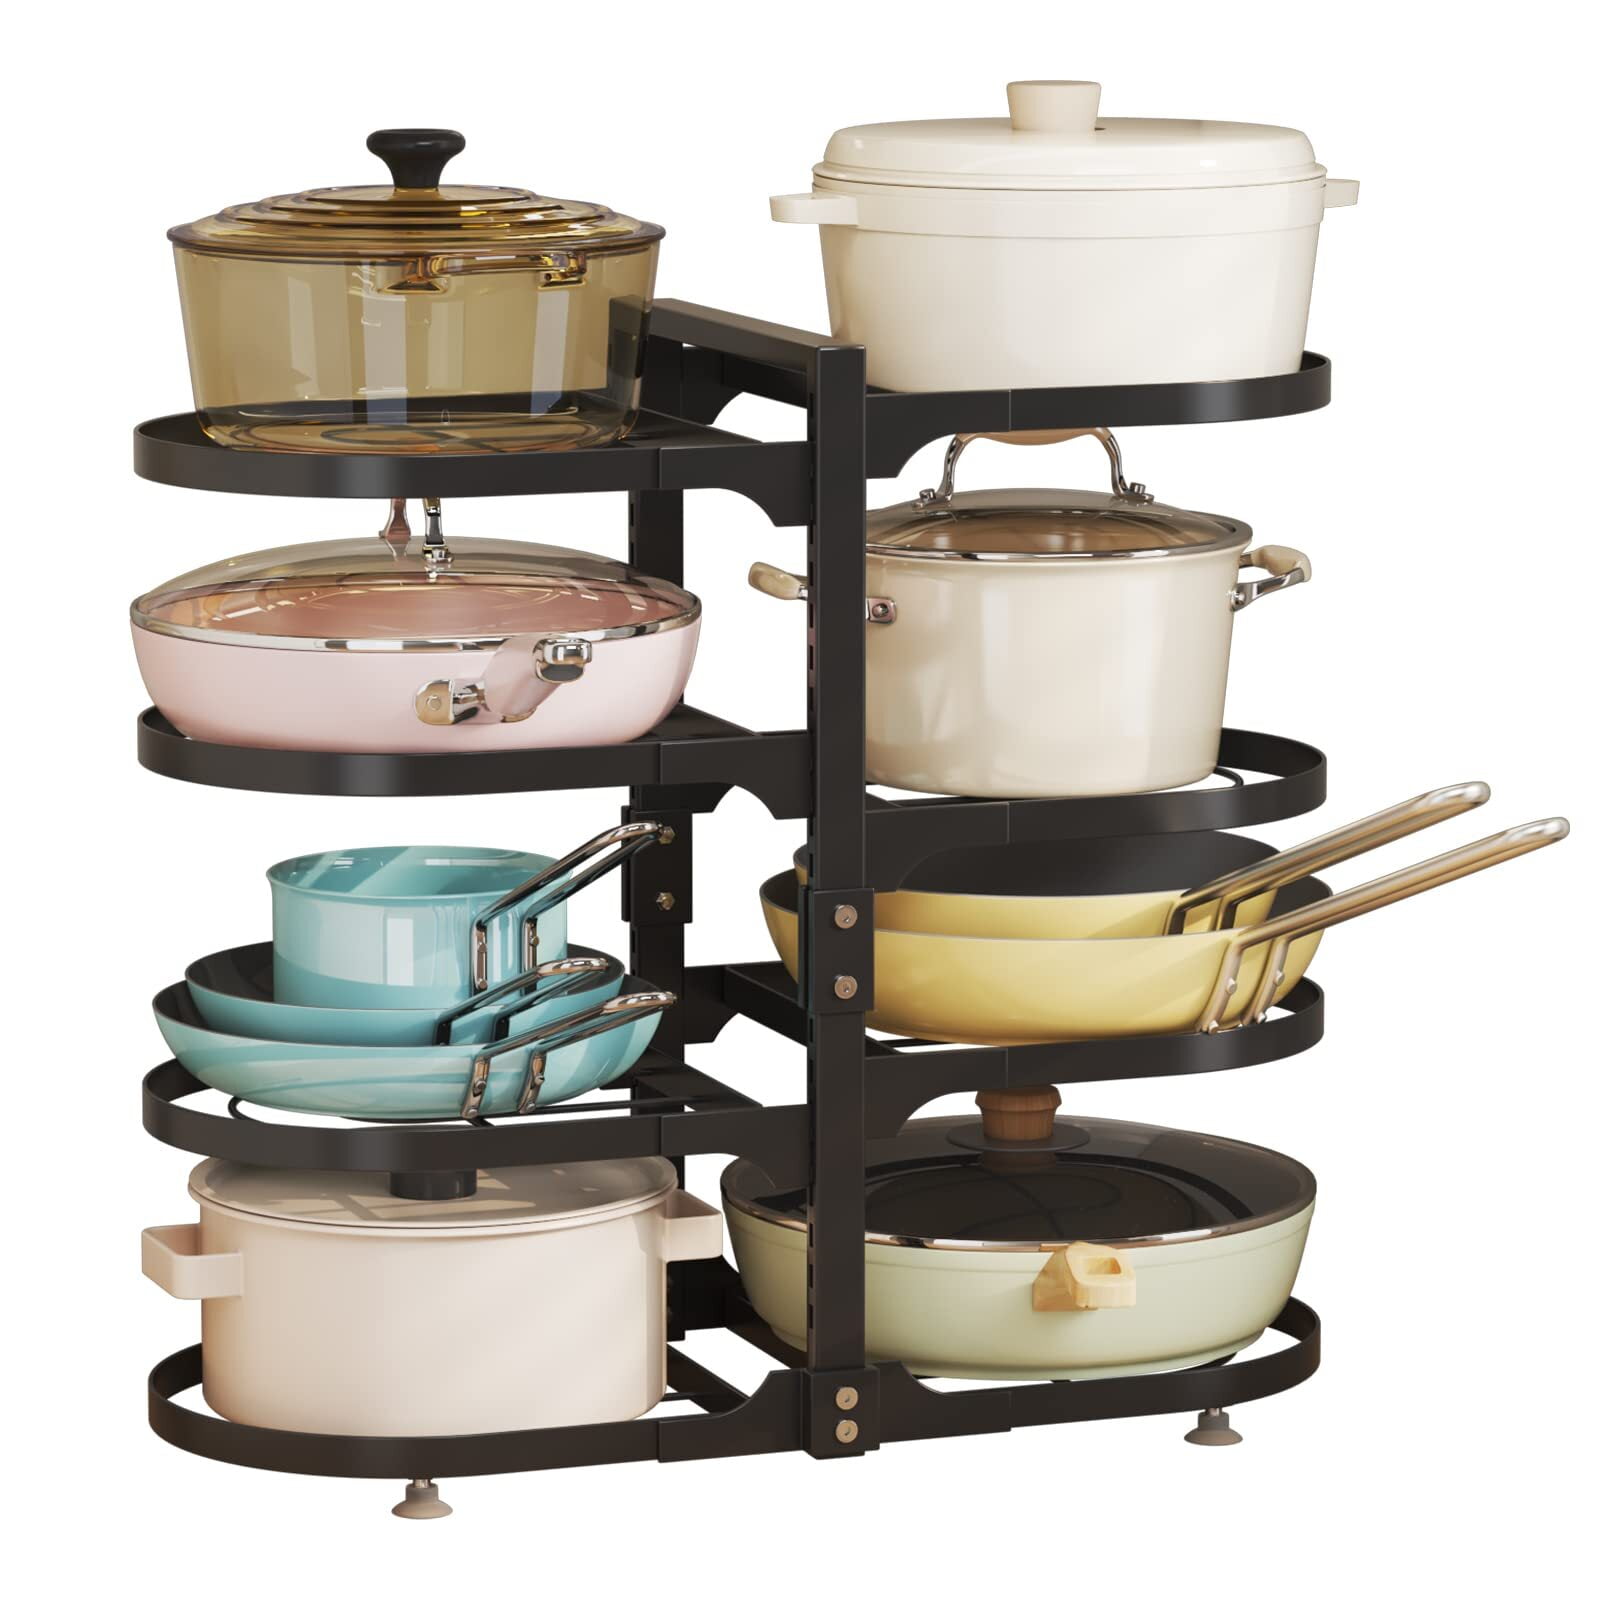 KOMFORA Pots and Pans Organizer Under Cabinet - 8-Tier Adjustable Pan Organizer Rack for Cabinet - Heavy-Duty Pot & Pan Organizer - Perfect to Store